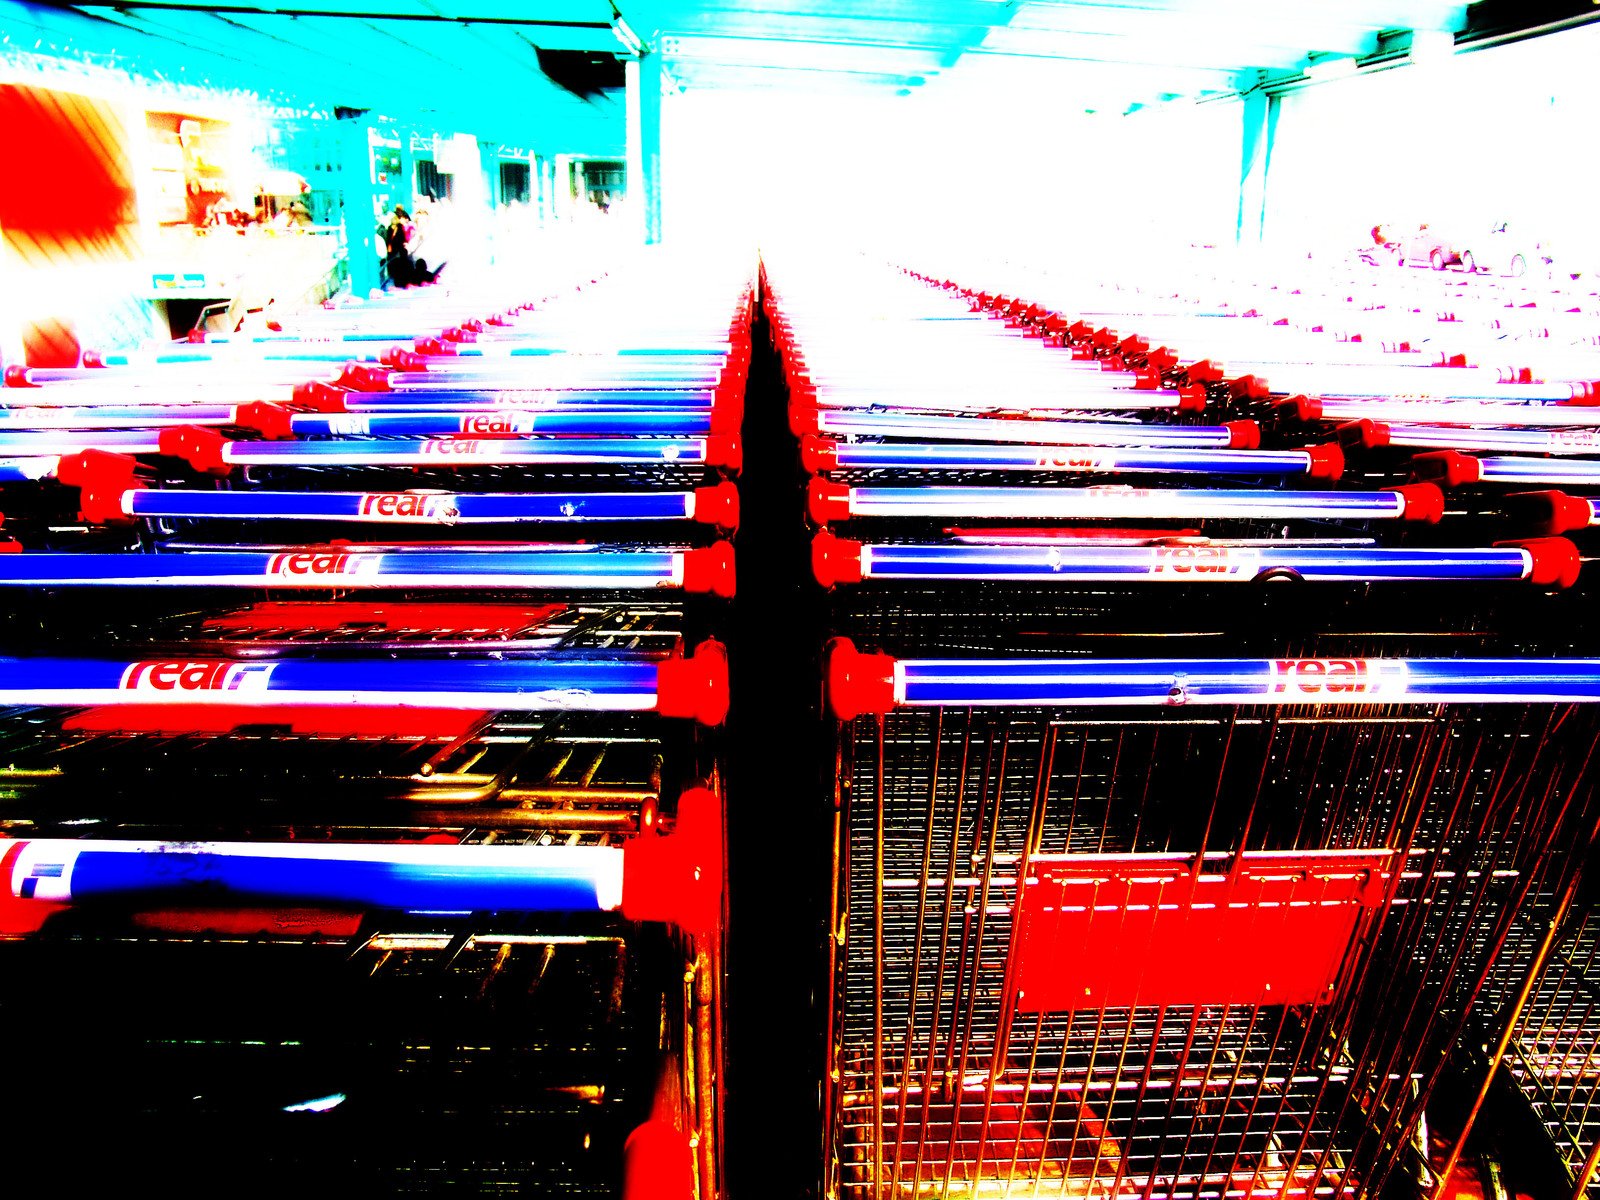 several baskets sit in a large warehouse line